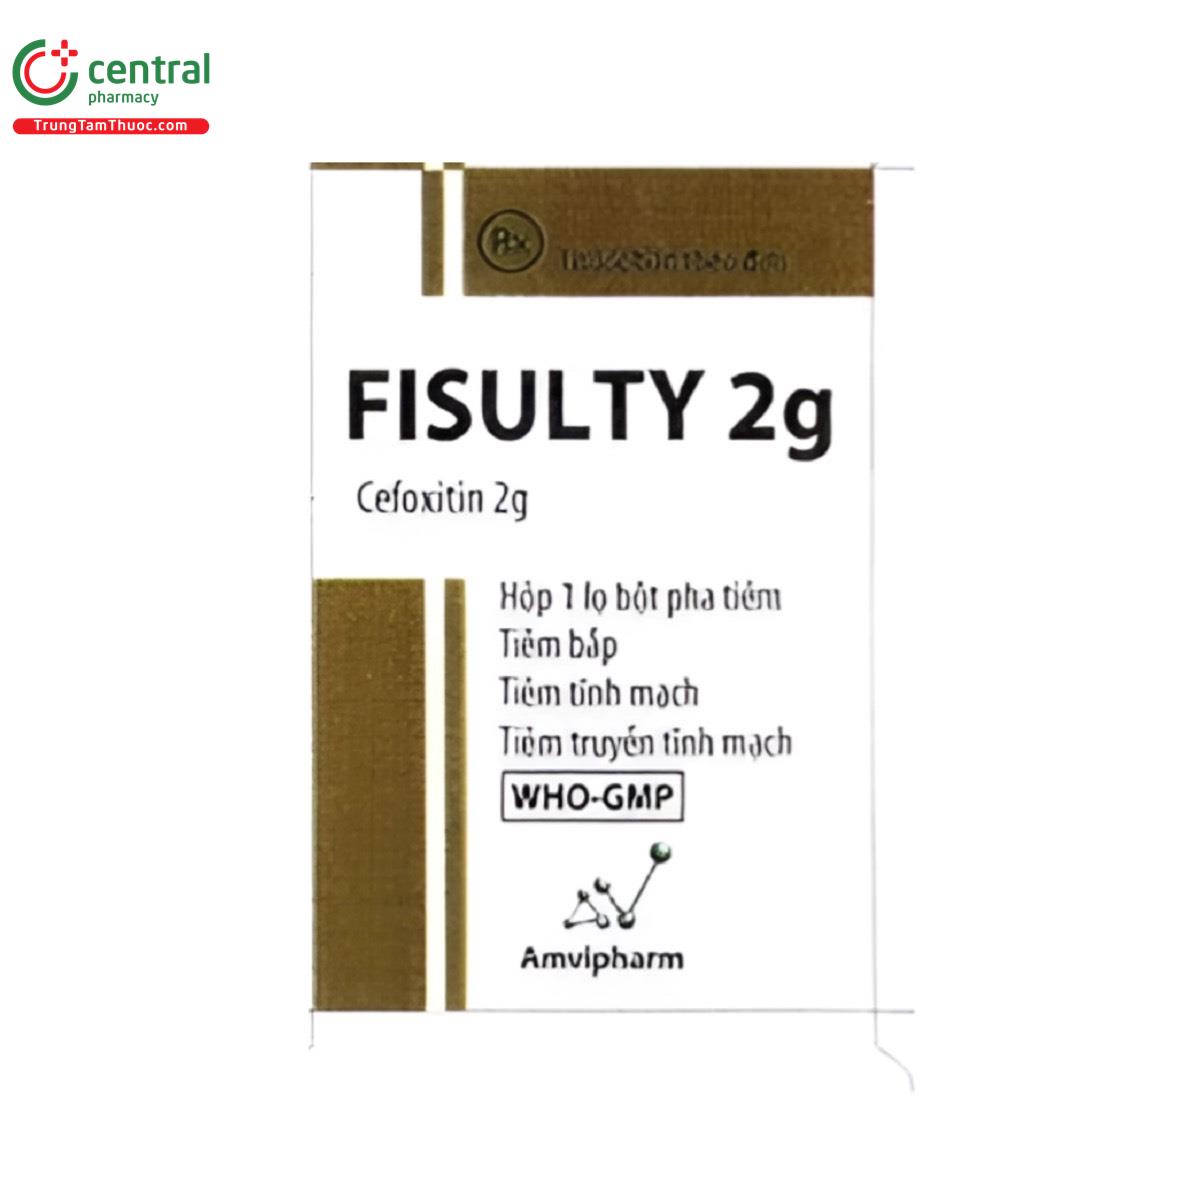 fisulty 2g 1 T8717